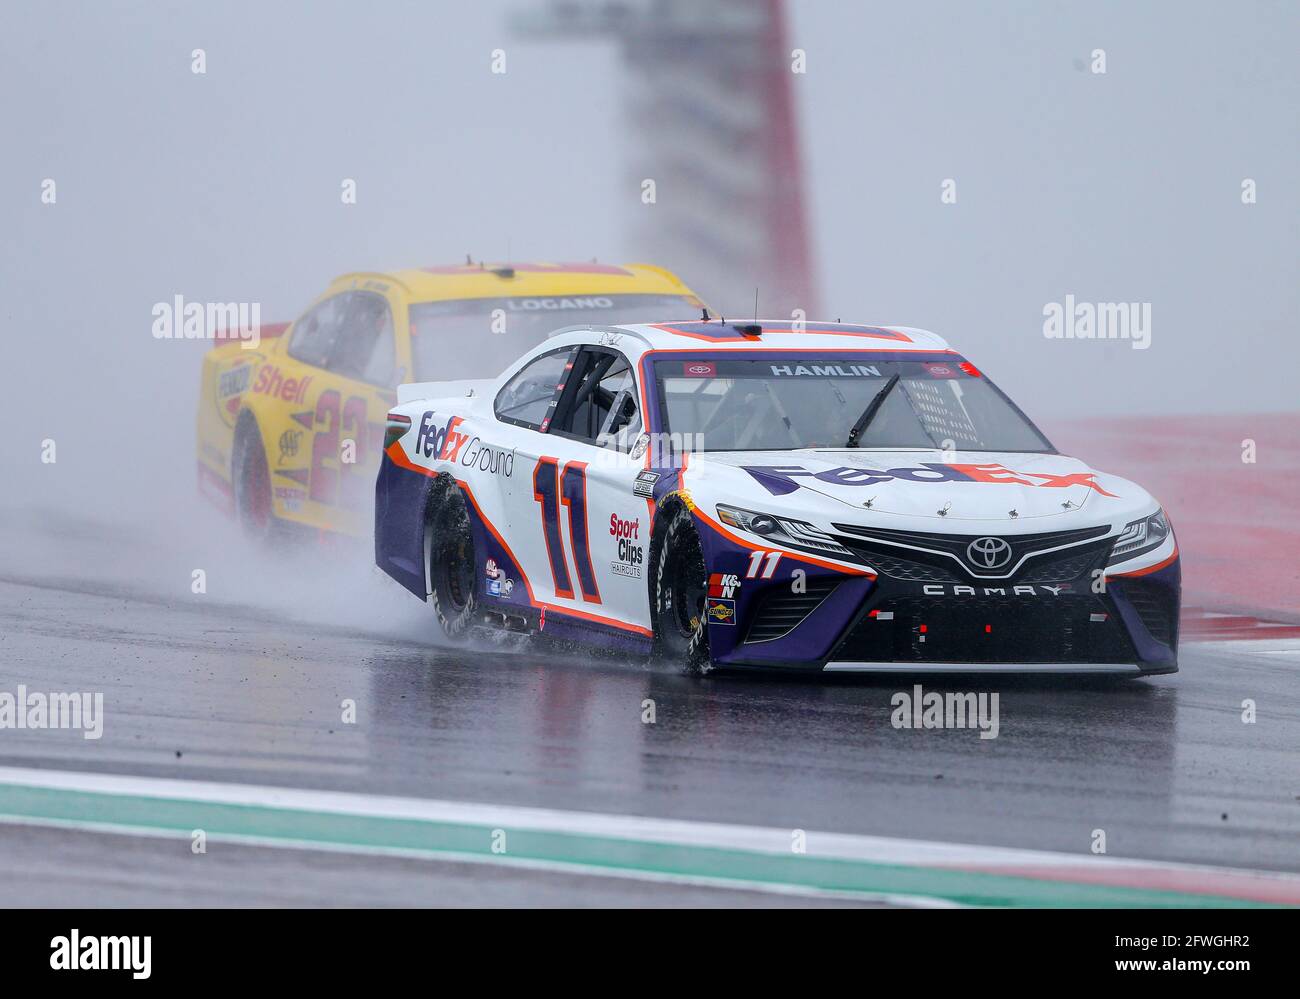 Austin. 22nd May, 2021. NASCAR Cup Series driver Denny Hamlin (11) and driver Joey Logano (22) during a practice round at Circuit of the Americas in Austin, Texas, on May 22, 2021. Credit: Scott Coleman/ZUMA Wire/Alamy Live News Stock Photo